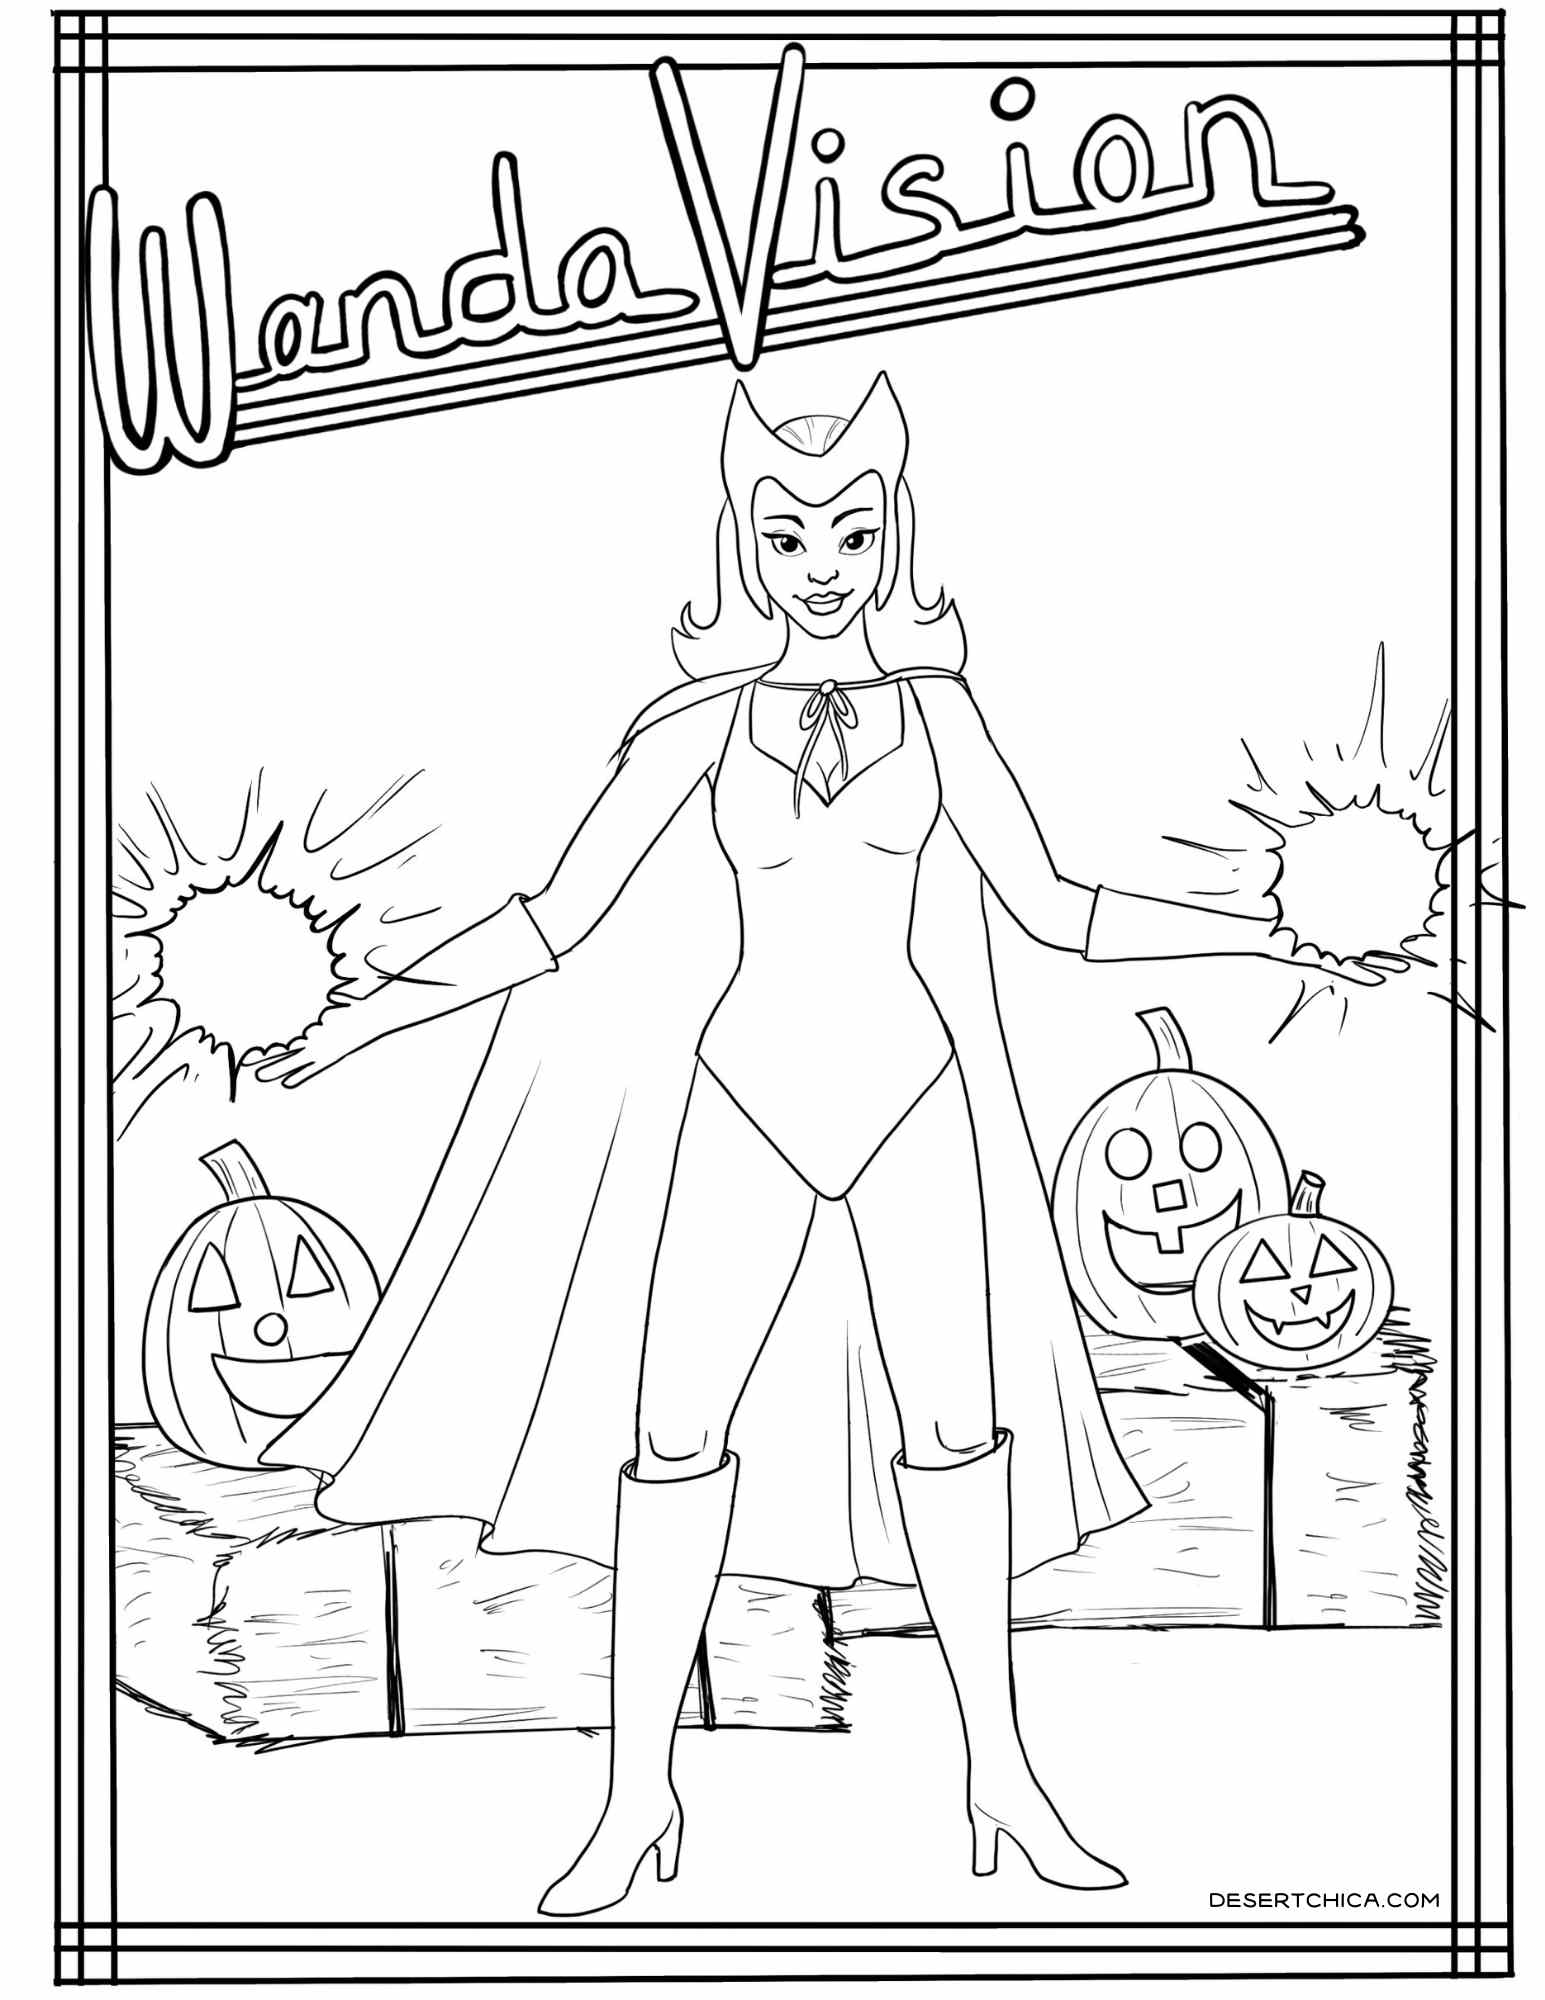 Download and Print these WandaVision Coloring Pages   Desert Chica